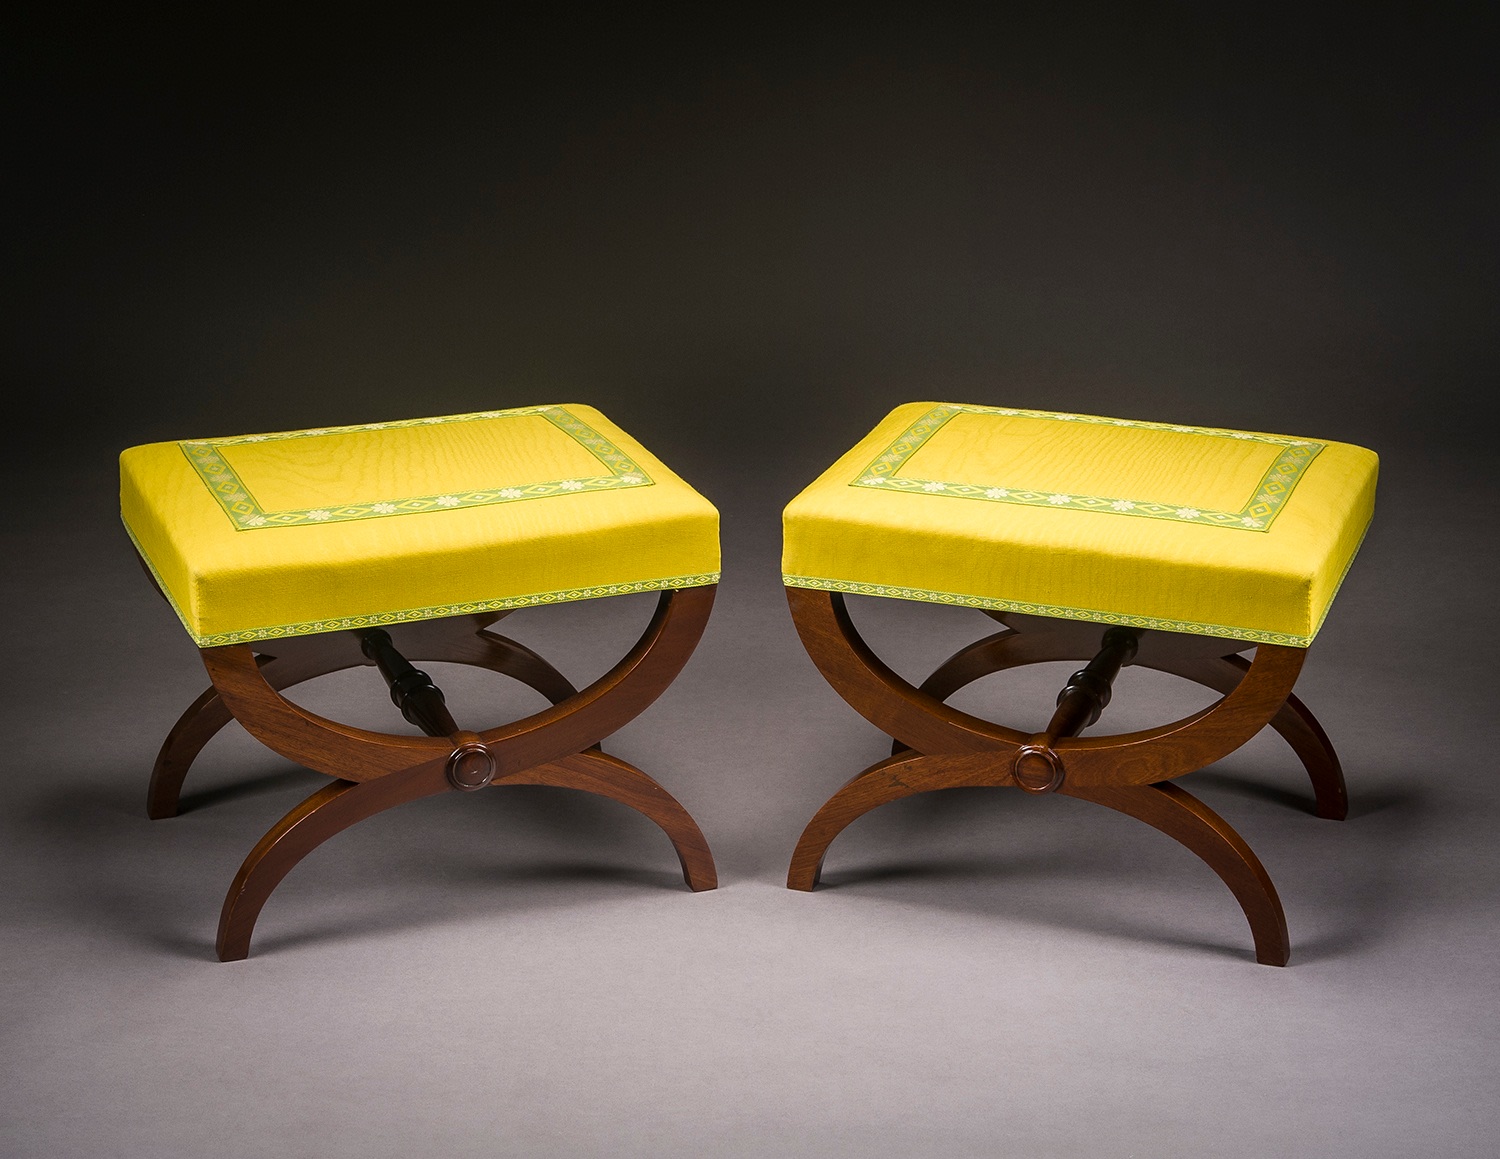 Pair Curule Benches, about 1830&ndash;35